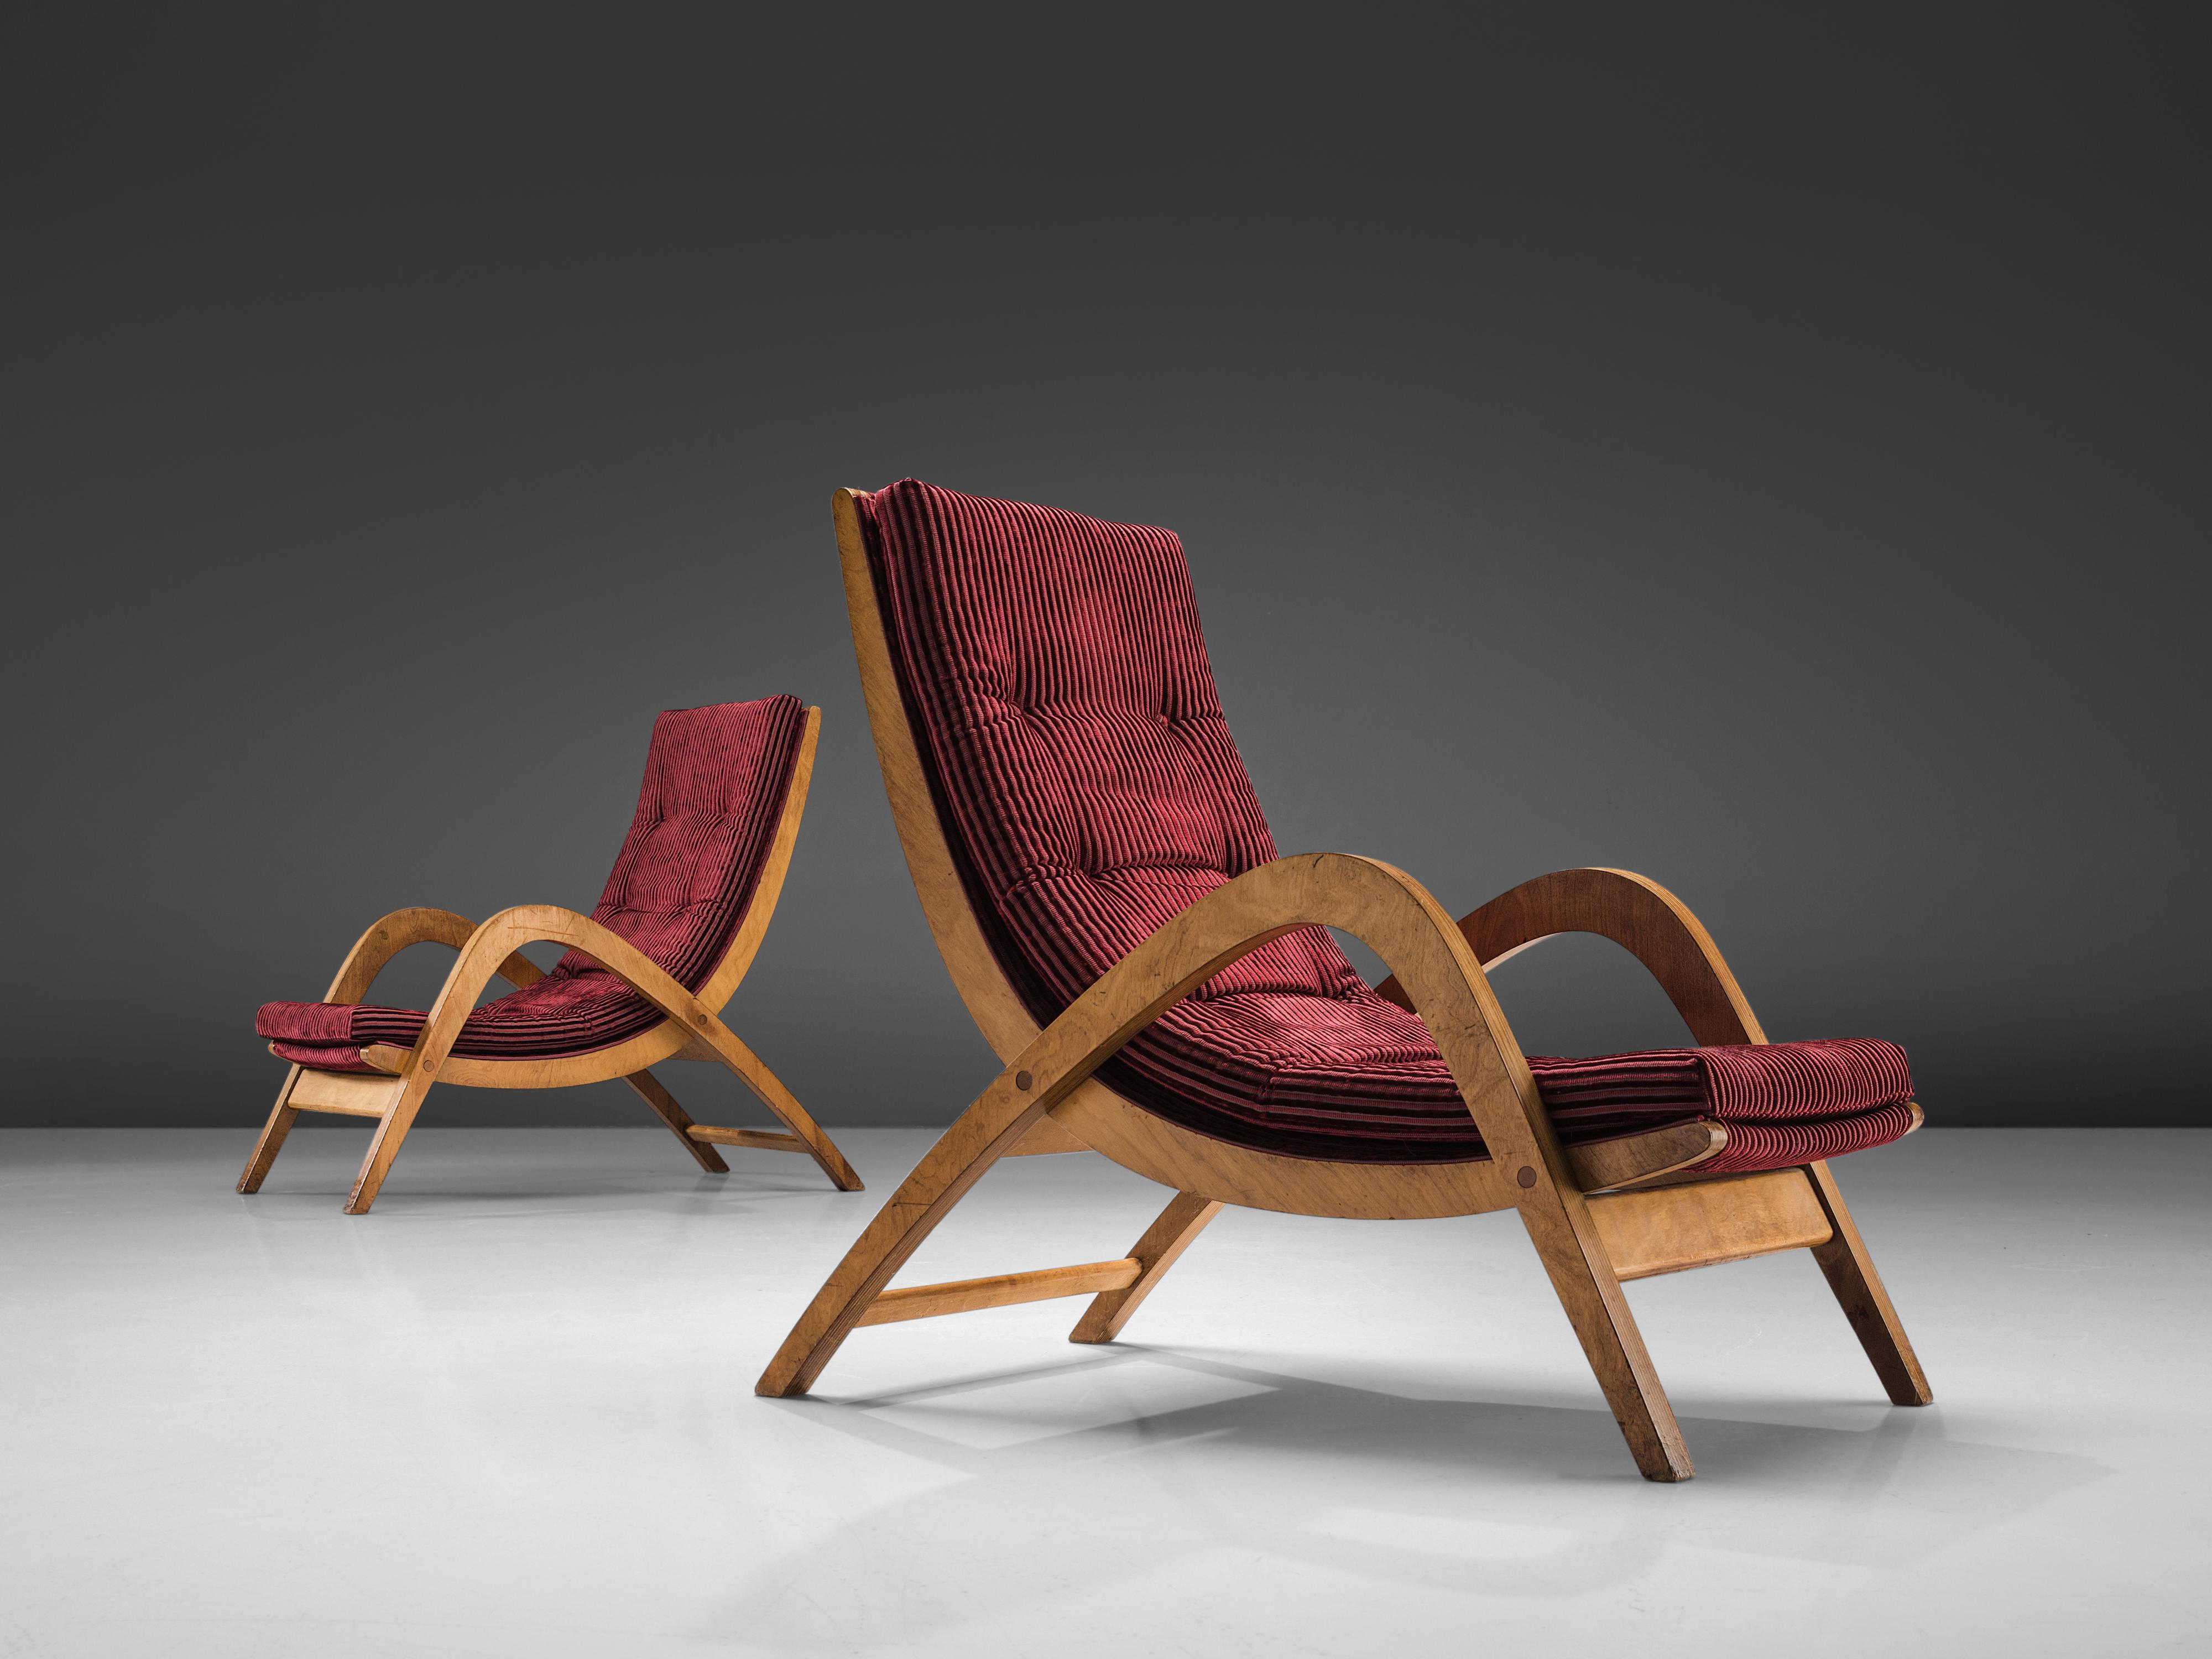 Neil Morris for H. Morris, lounge chairs, red upholstery, birch plywood, Scotland, 1940s 

These rare chairs, designed by Neil Morris for H. Morris, are sculptural, elegant and feature various curves, both in the seat and in the armrests. The frame